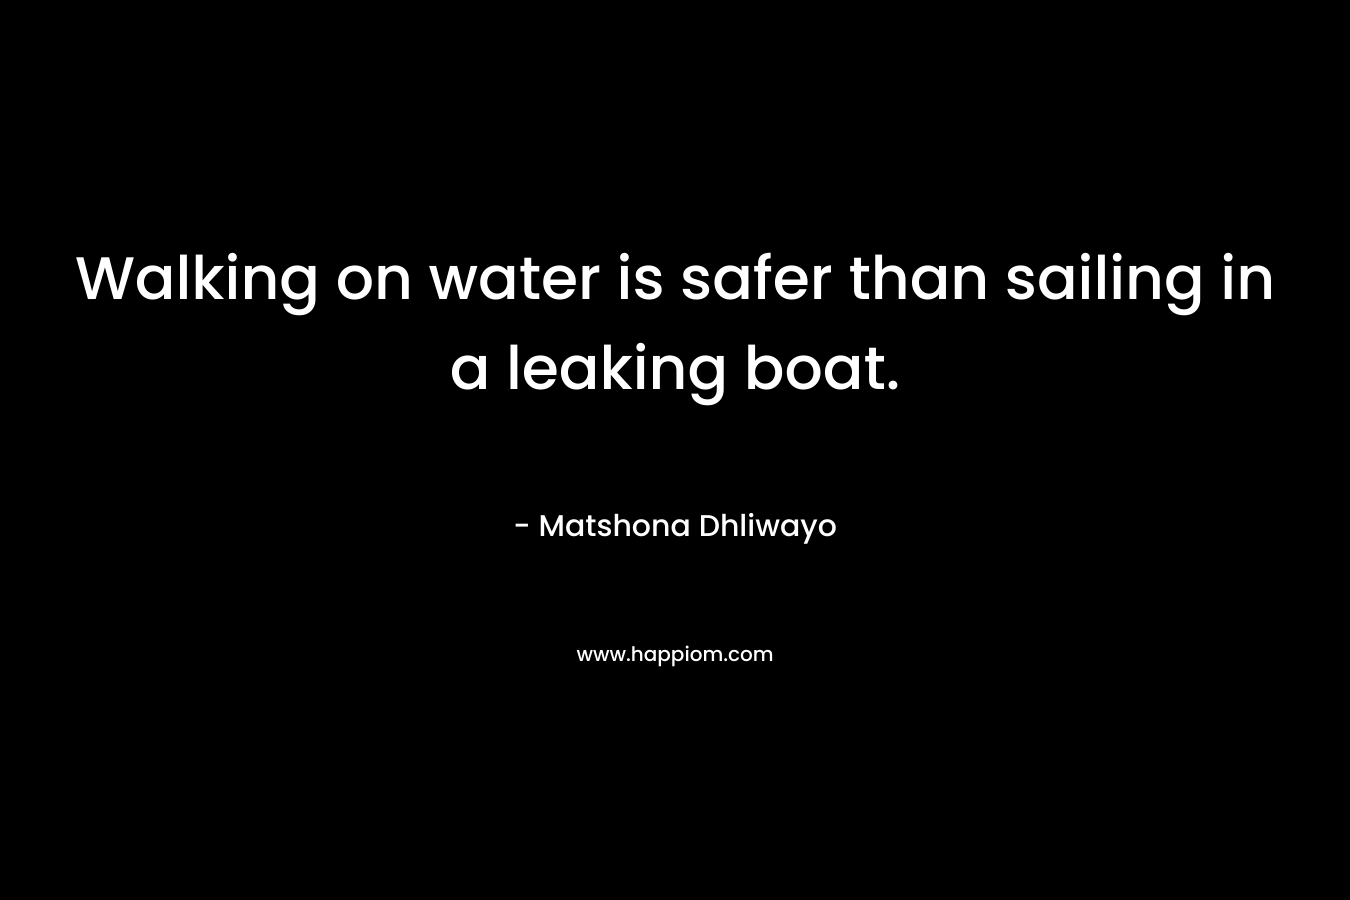 Walking on water is safer than sailing in a leaking boat.